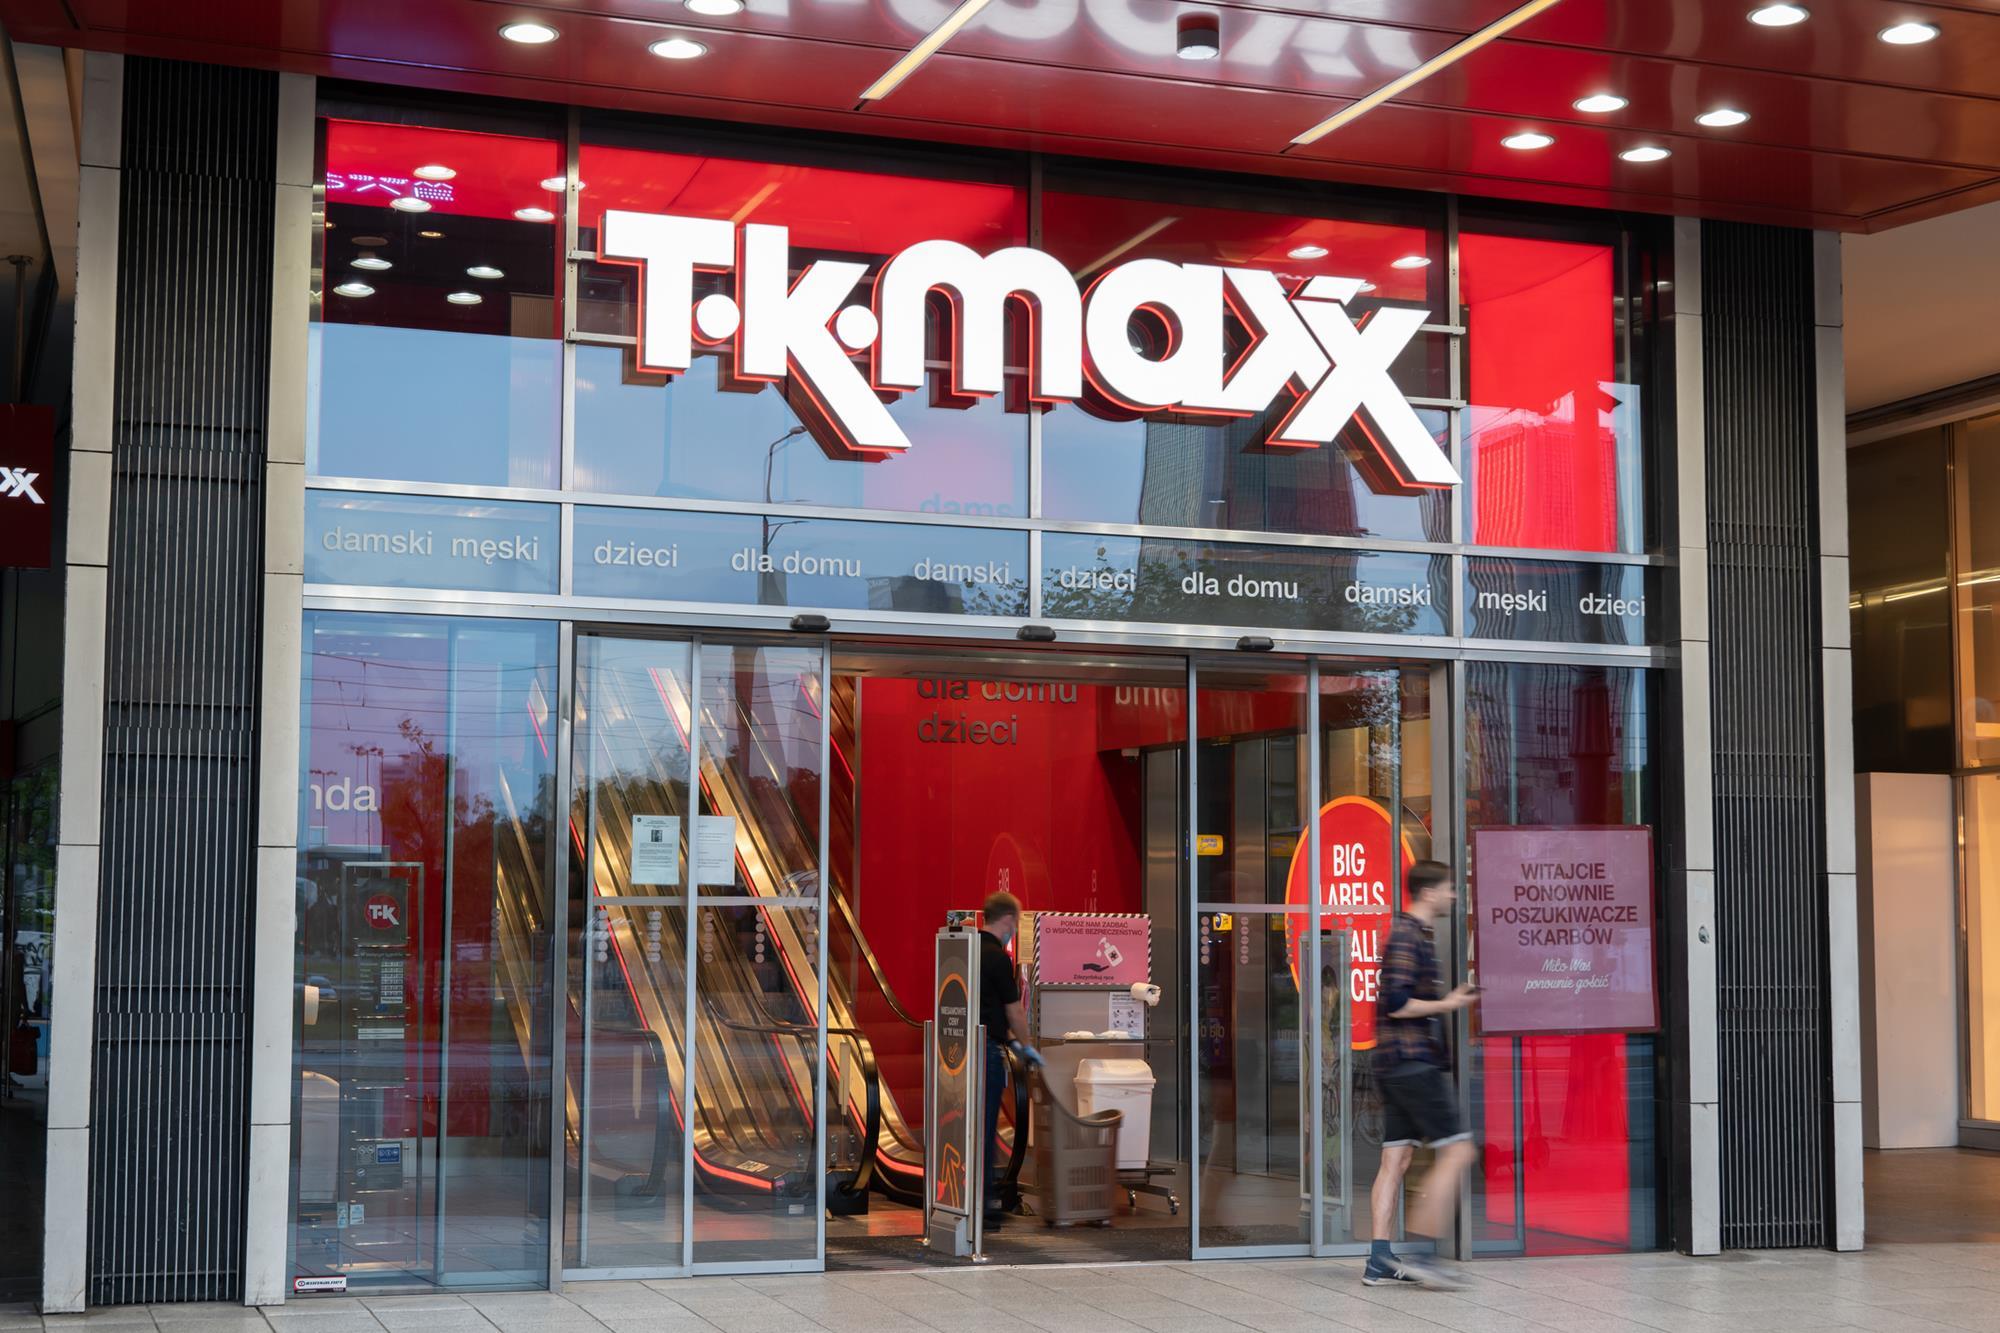 TK Maxx in London: 2 reviews and 3 photos